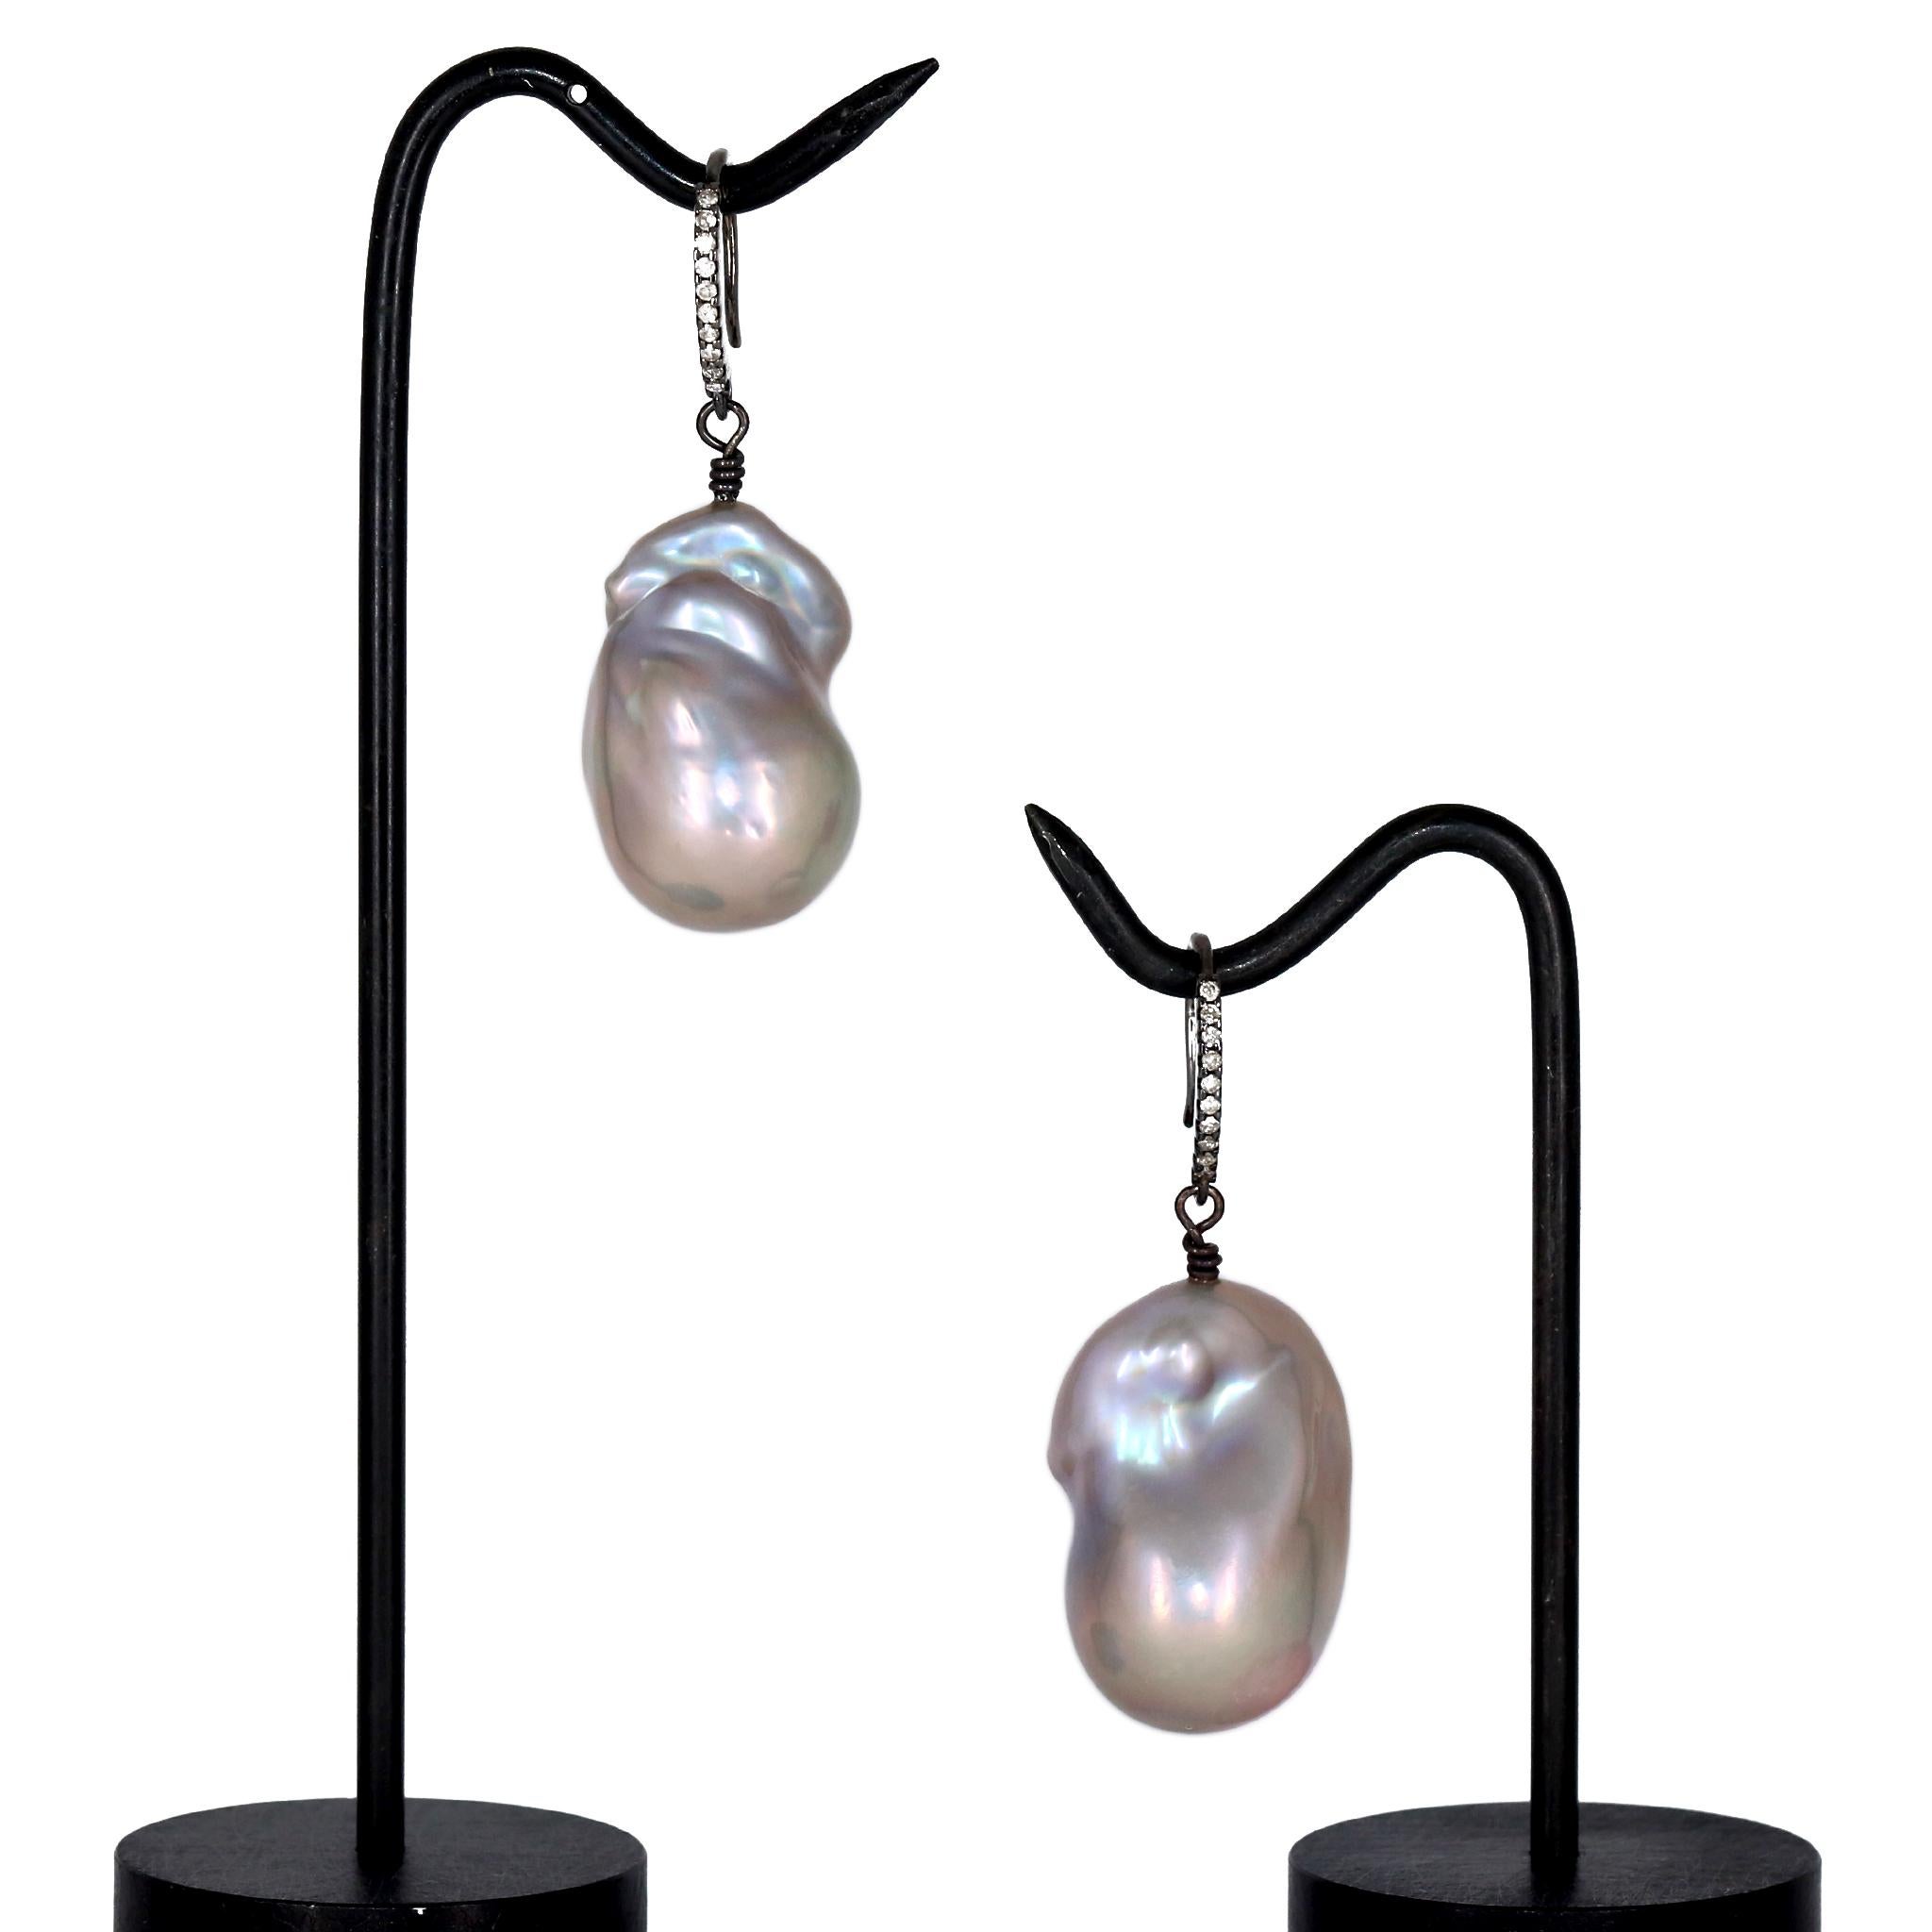 Drop Earrings featuring a matched pair of exquisite iridescent silvery-blue freshwater baroque pearls with violet and pink overtones, attached to diamond-set and black rhodium-finished silver twist ear wires. Pearls measure 28.5mm x 18.5mm and 27mm